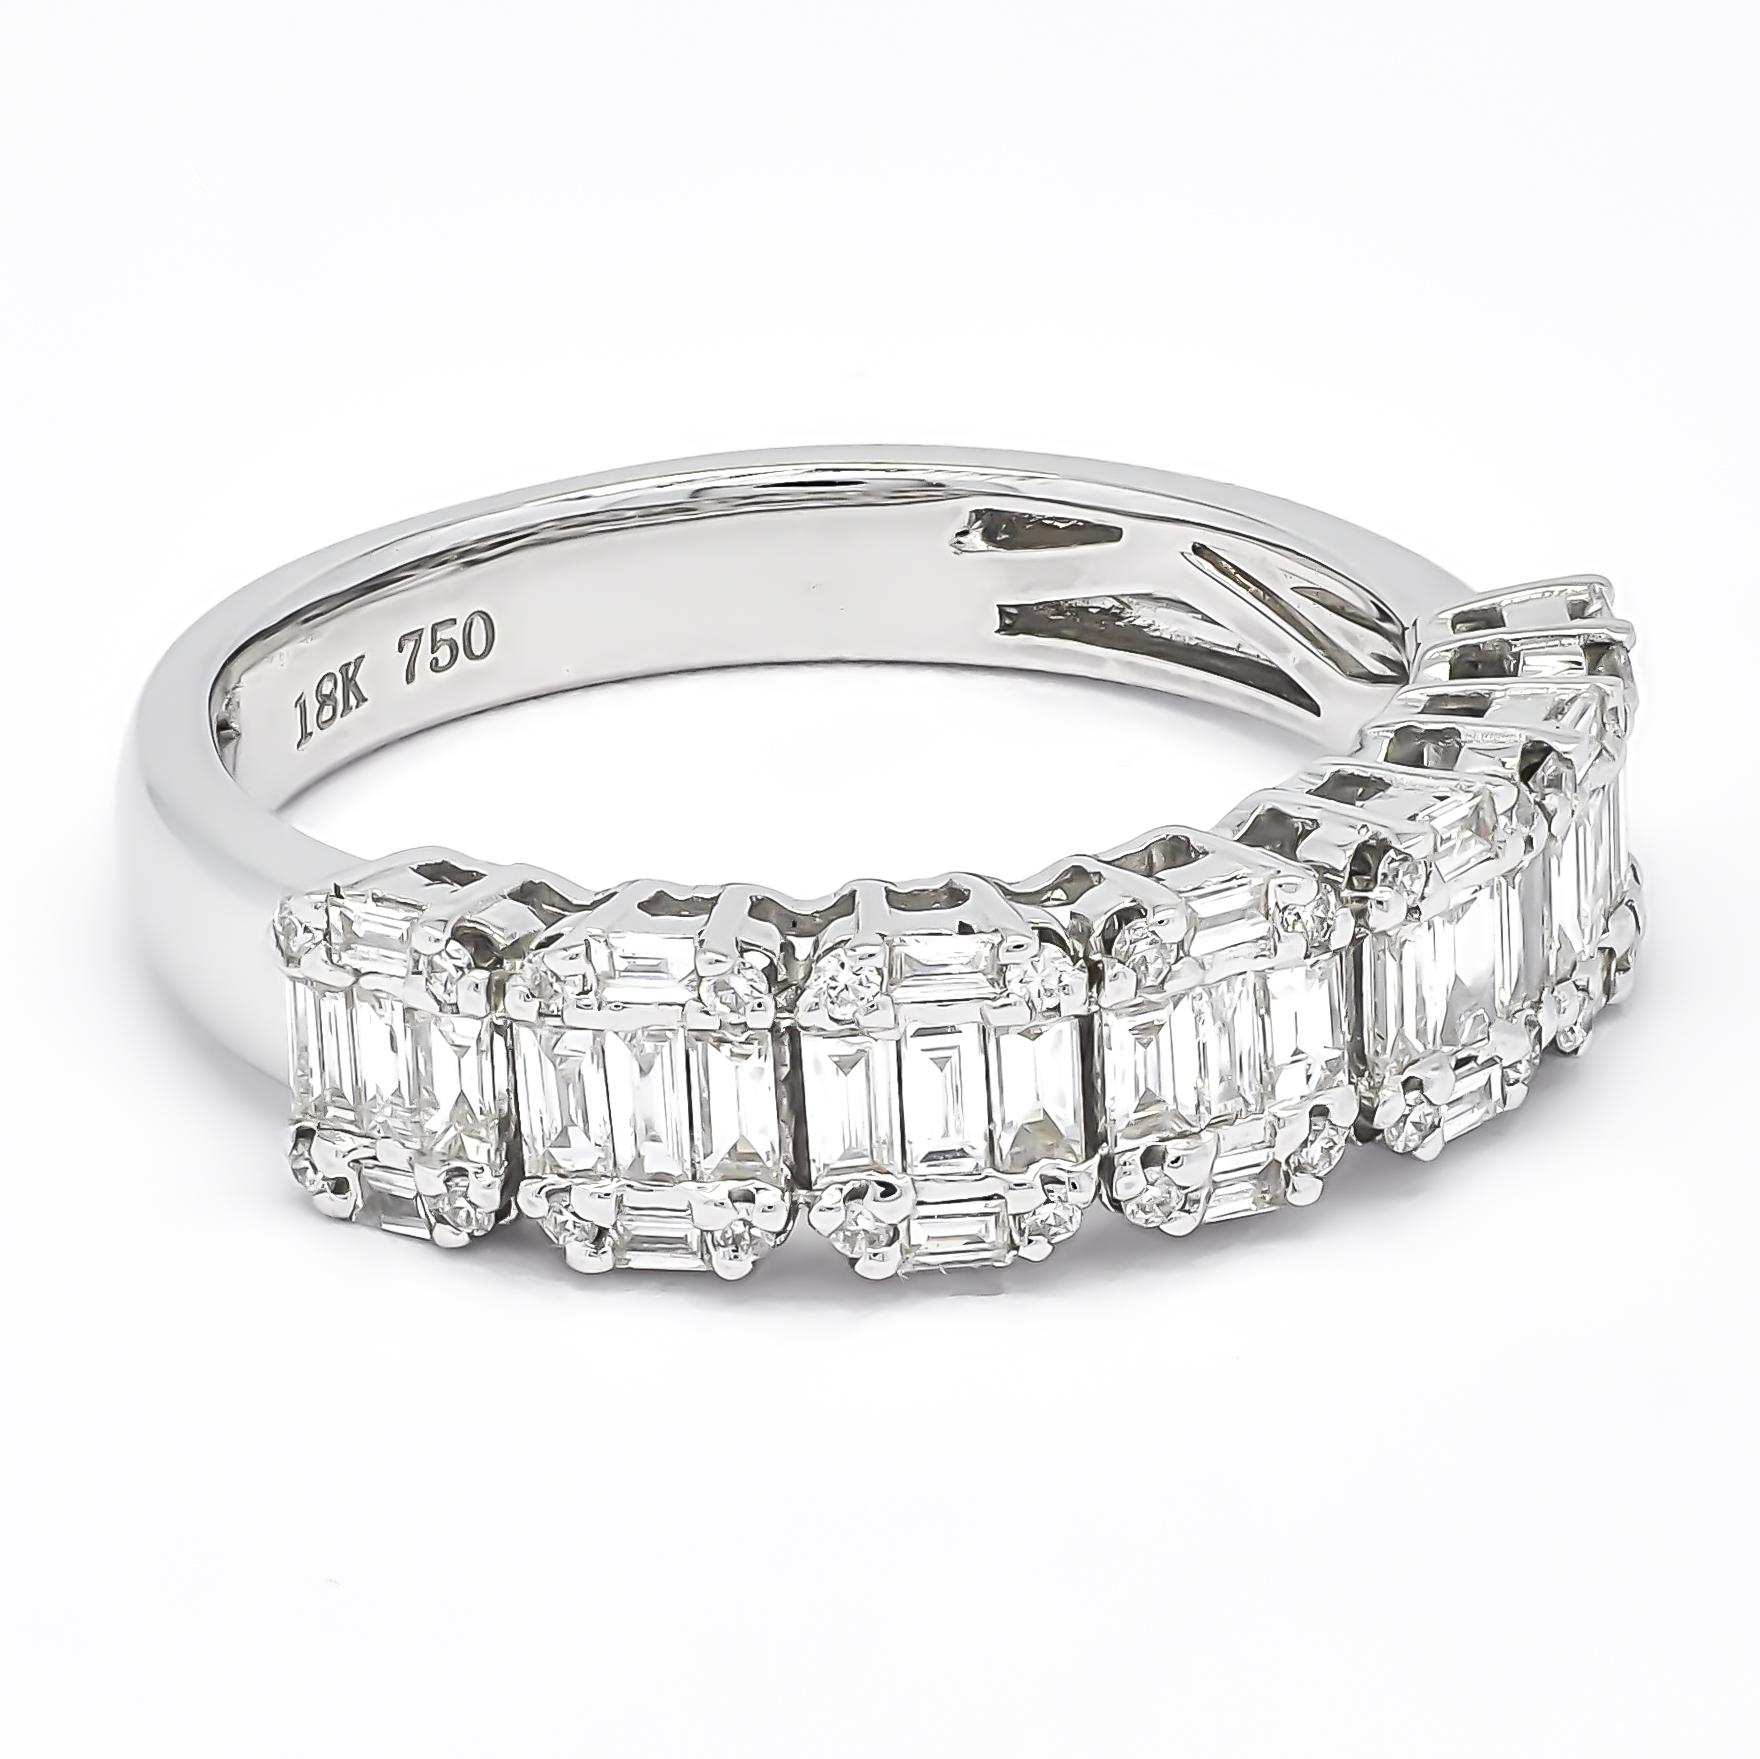 Fancy cut Round and Baguette diamonds form seven square Cushion Cluster set diamond gives this wedding band in a polished look. 


Metal: 18kt White Gold
Gemstone: Natural Diamonds
Shape: Round / Baguette Brilliant
Total Carat Weight: